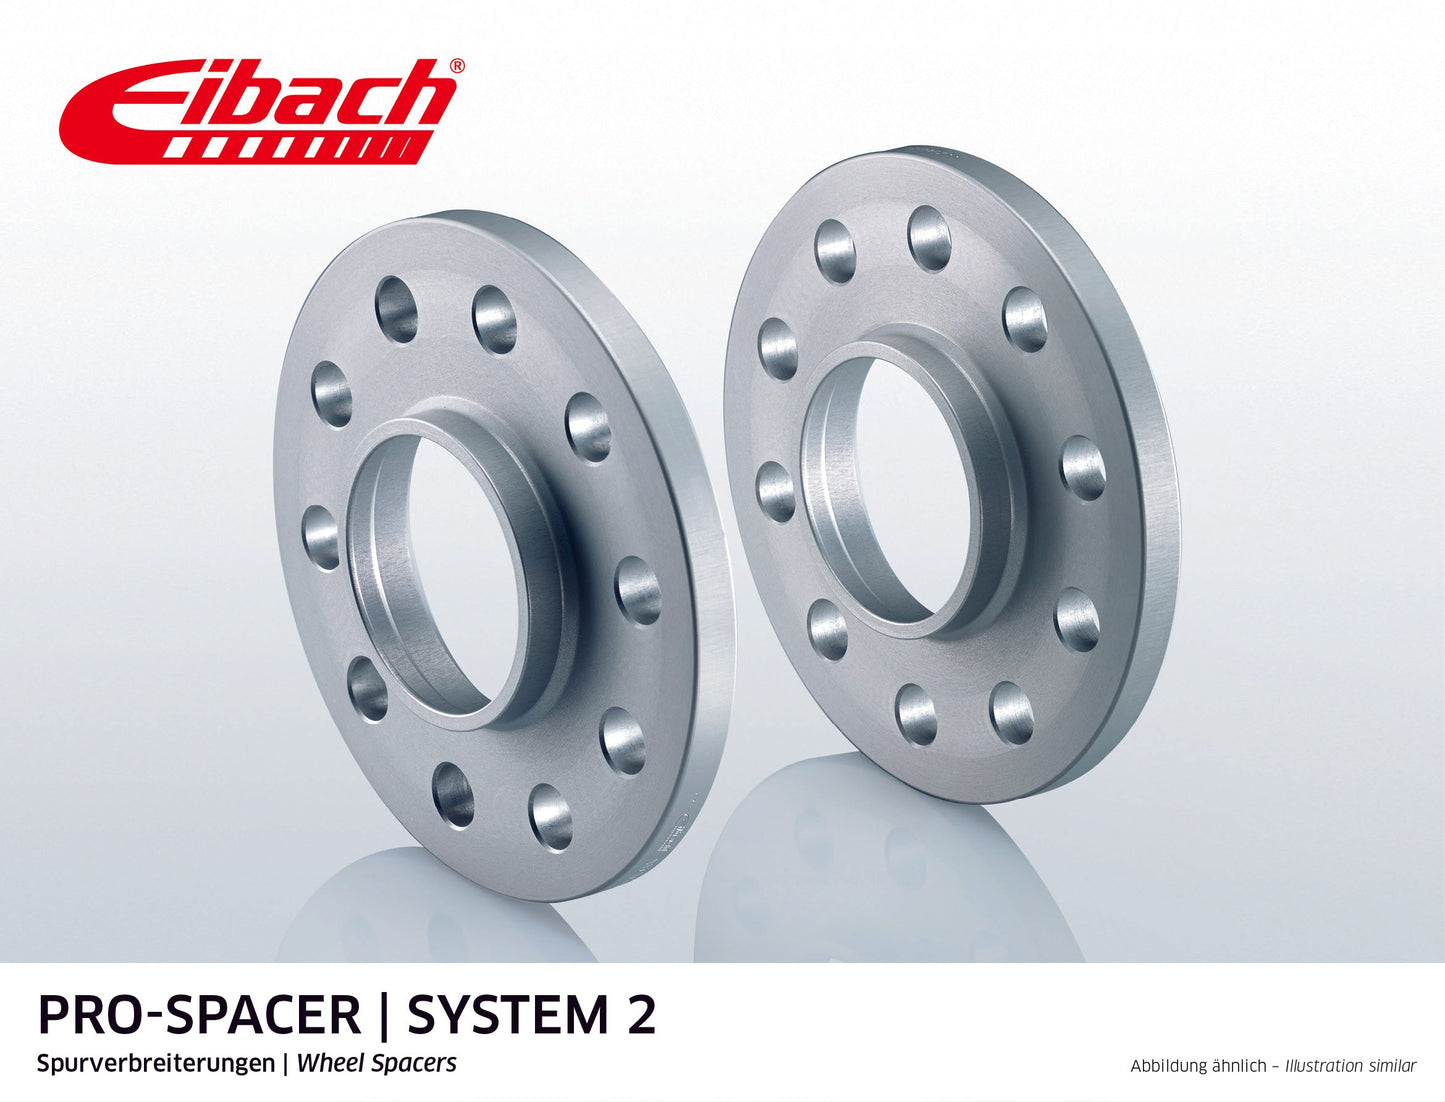 Eibach Pro-Spacer Kit (Pair Of Spacers) 12mm Per Spacer (System 2) S90-2-12-013 (Silver) at £110.81